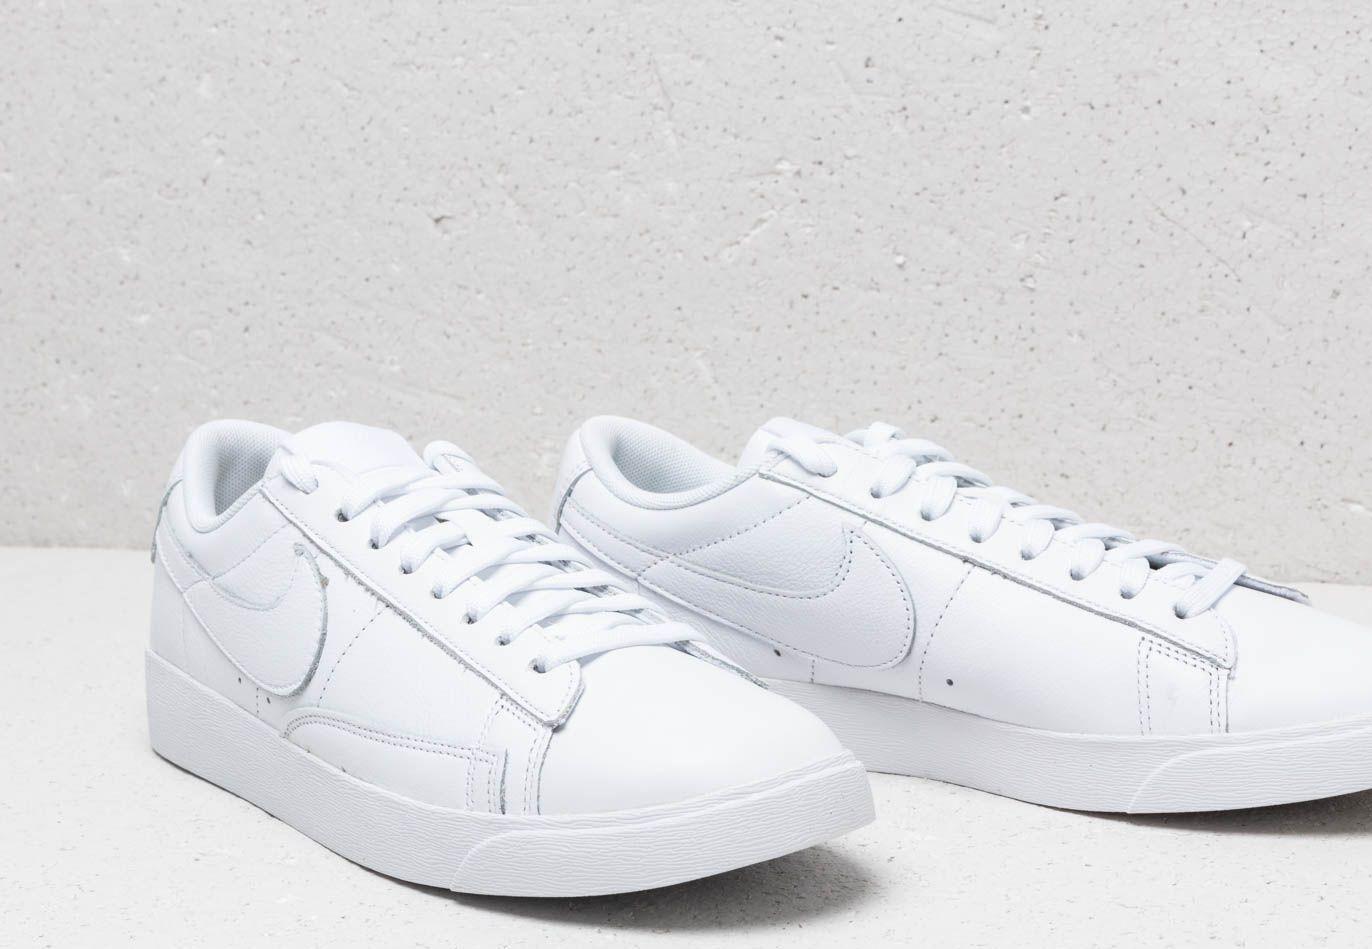 Nike Leather Blazer Low Le Shoes in White | Lyst